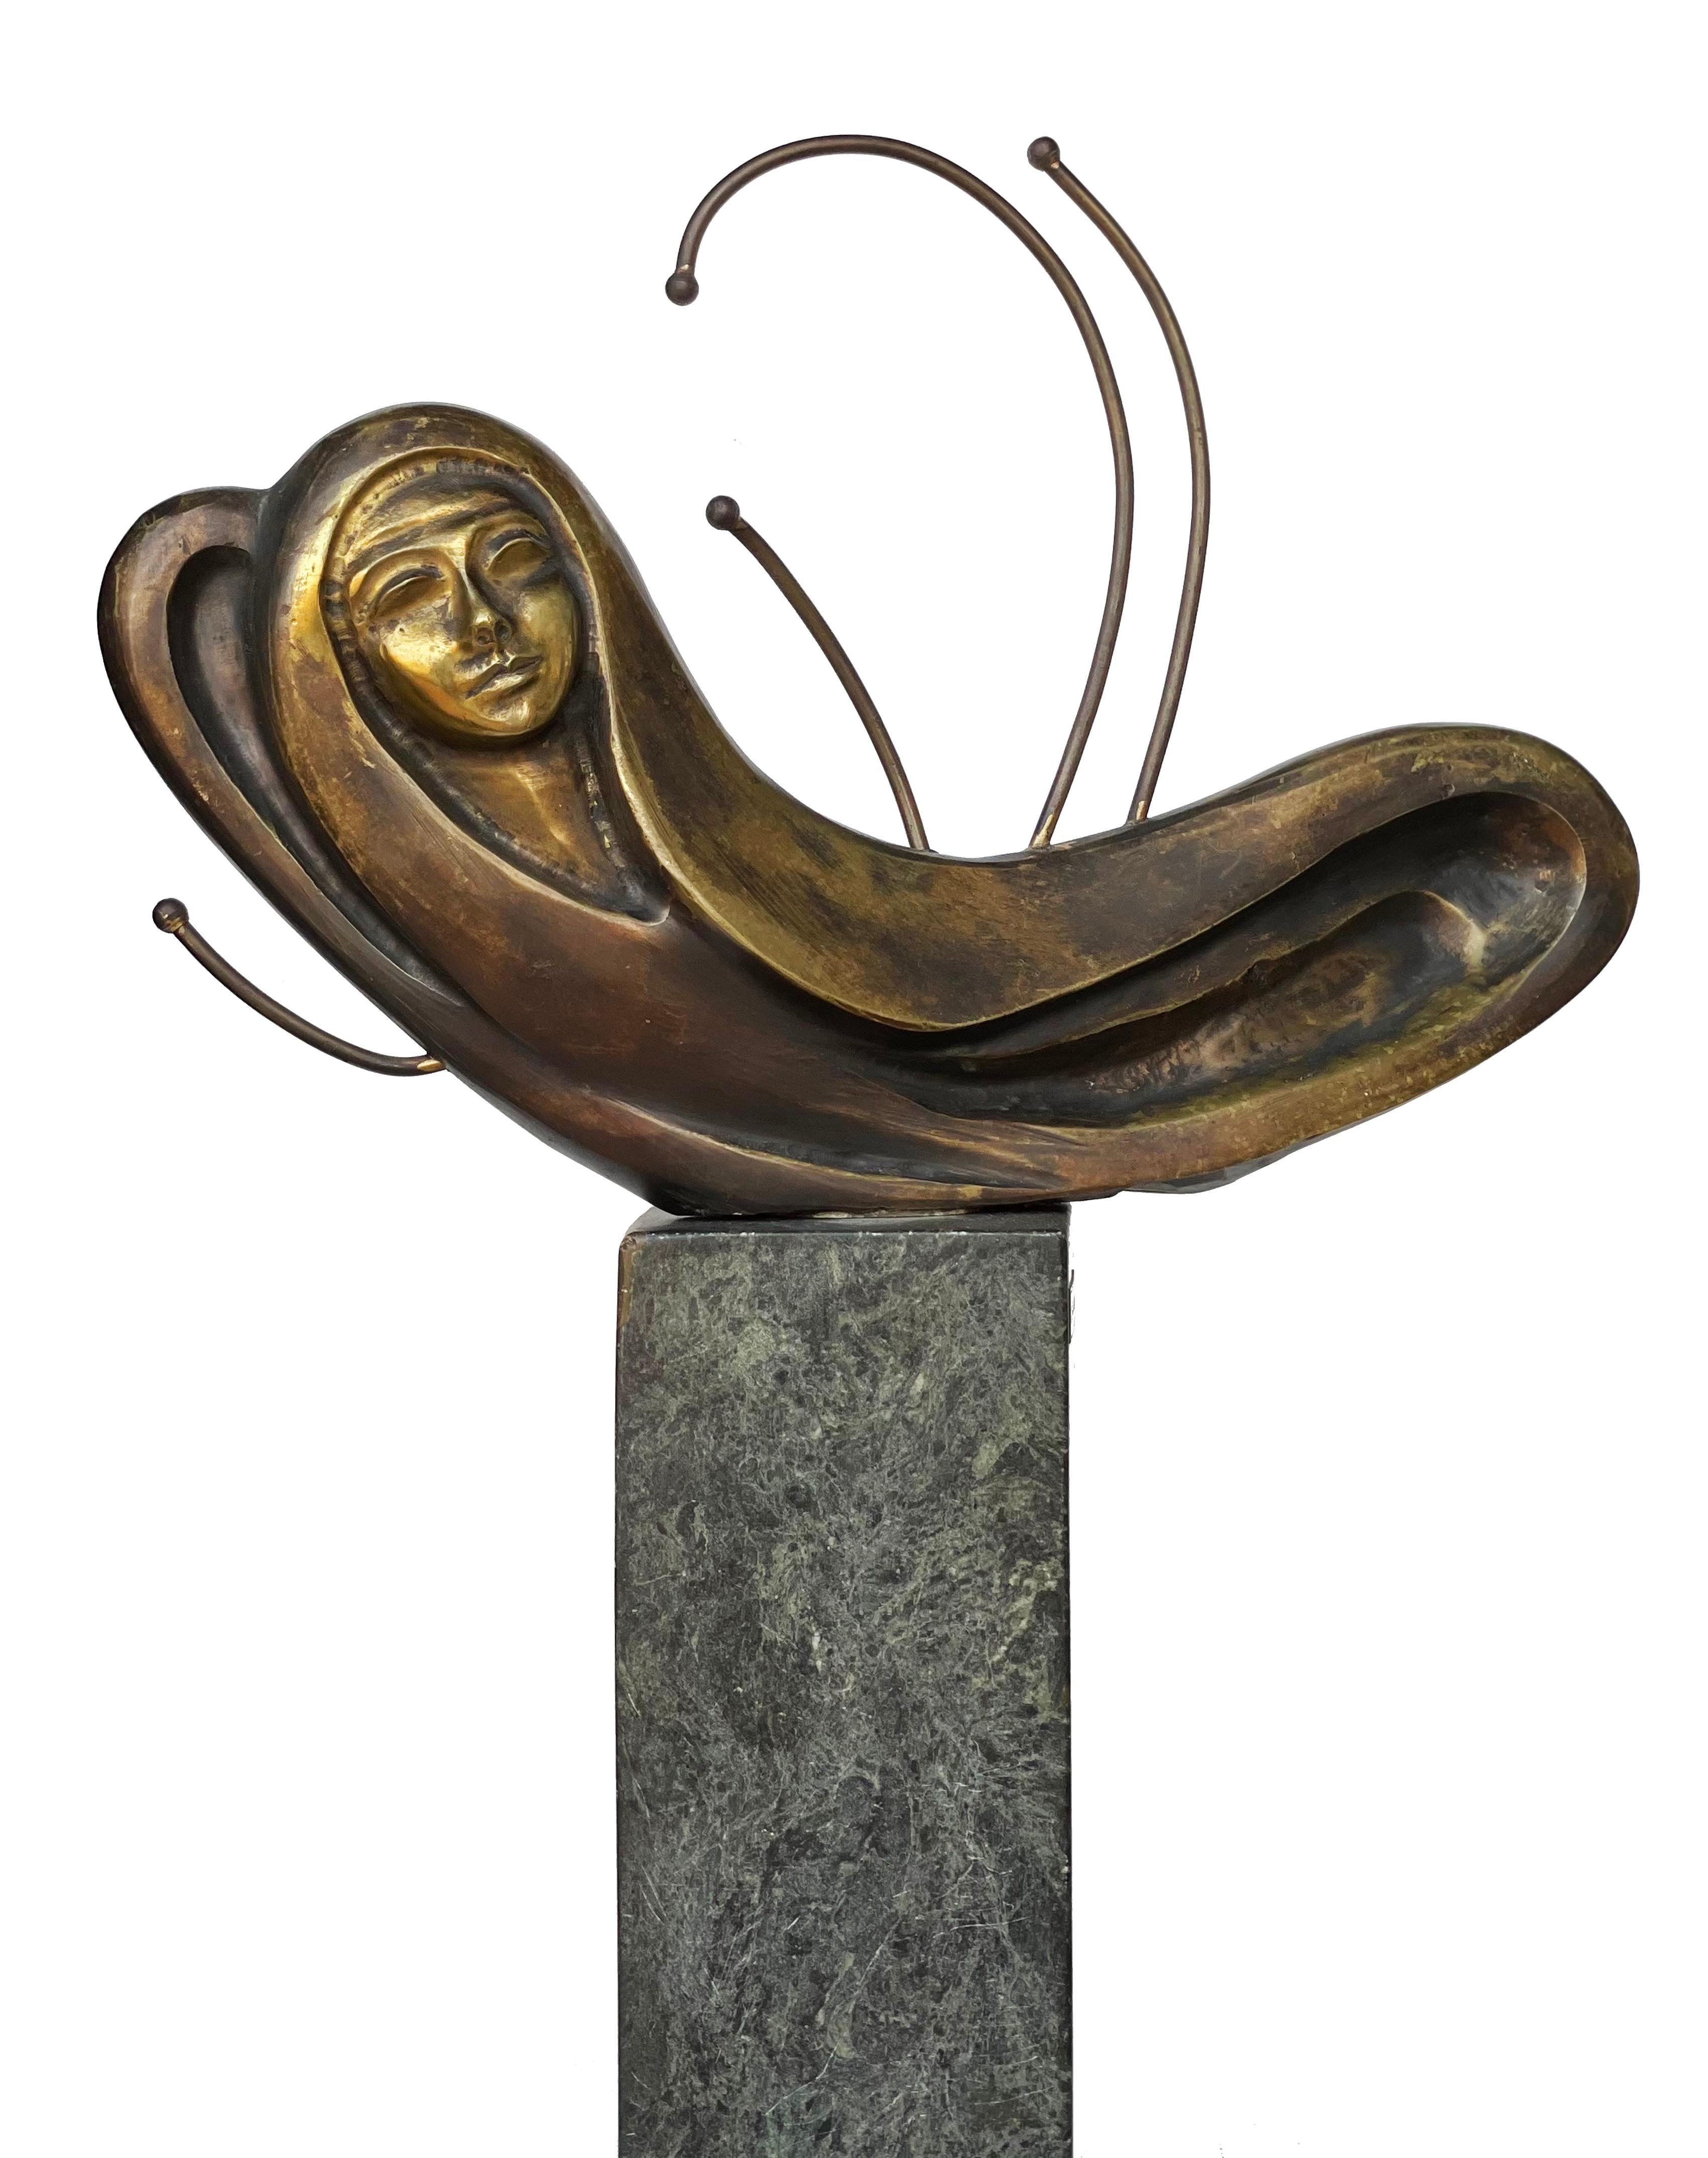 "Chrysalis" Bronze and Marble sculpture 19" x 15" in by Ibrahim Abd Elmalak

Chrysalis, 2005
Bronze & Marble 
48 x 39 cm, Signed & Dated


Sculptures that mostly depict his characteristic figures of feminine form and feeling – a central element to